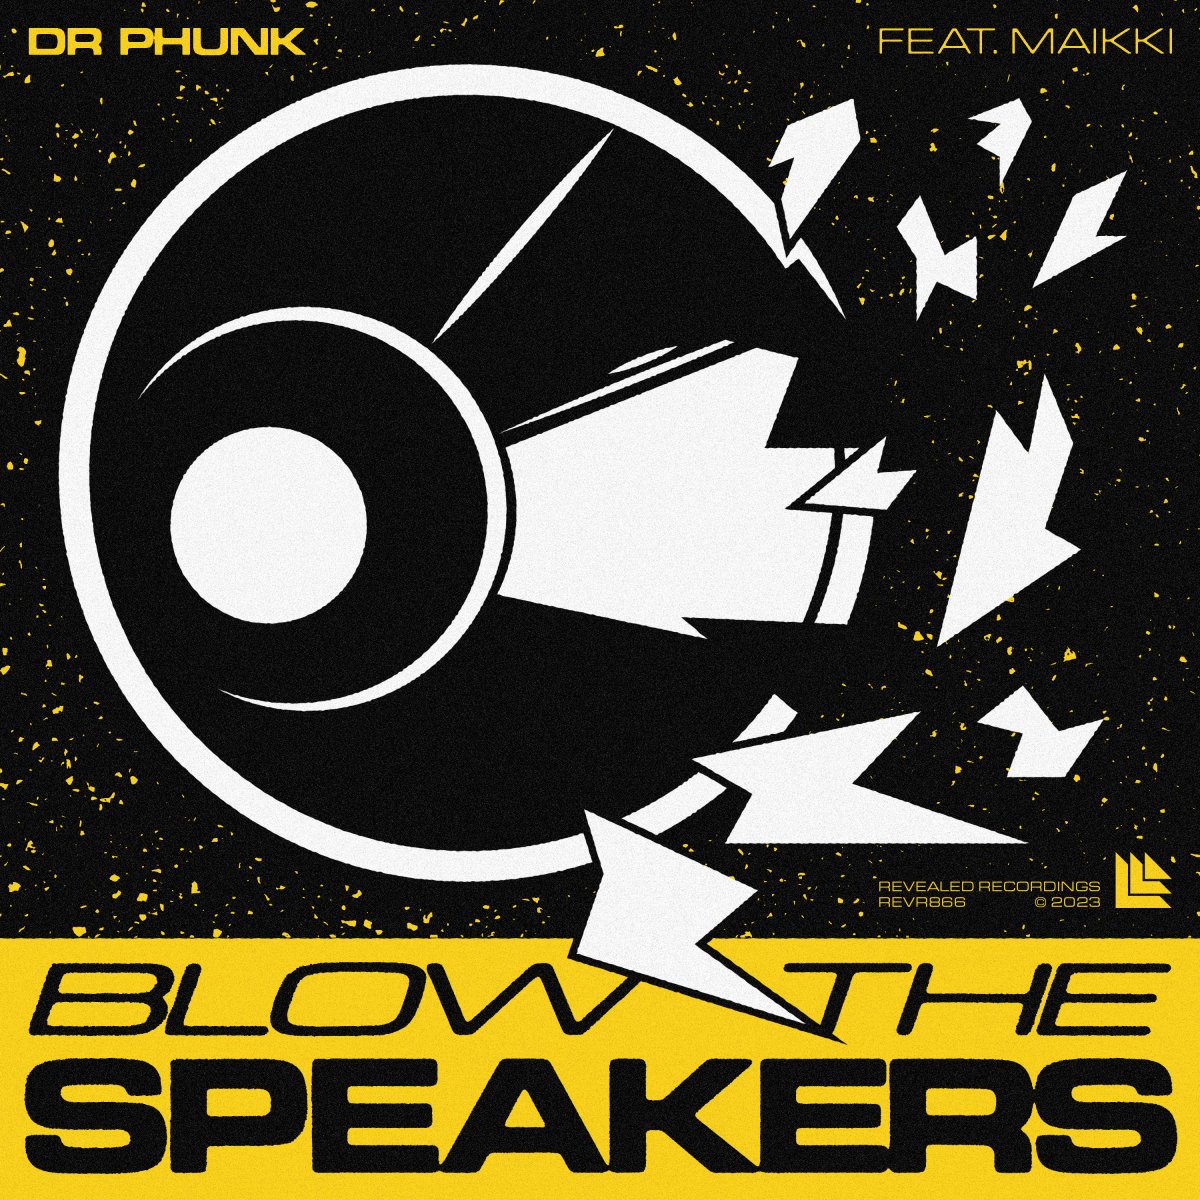 Blow The Speakers - Dr Phunk⁠ feat. Maikki⁠ 